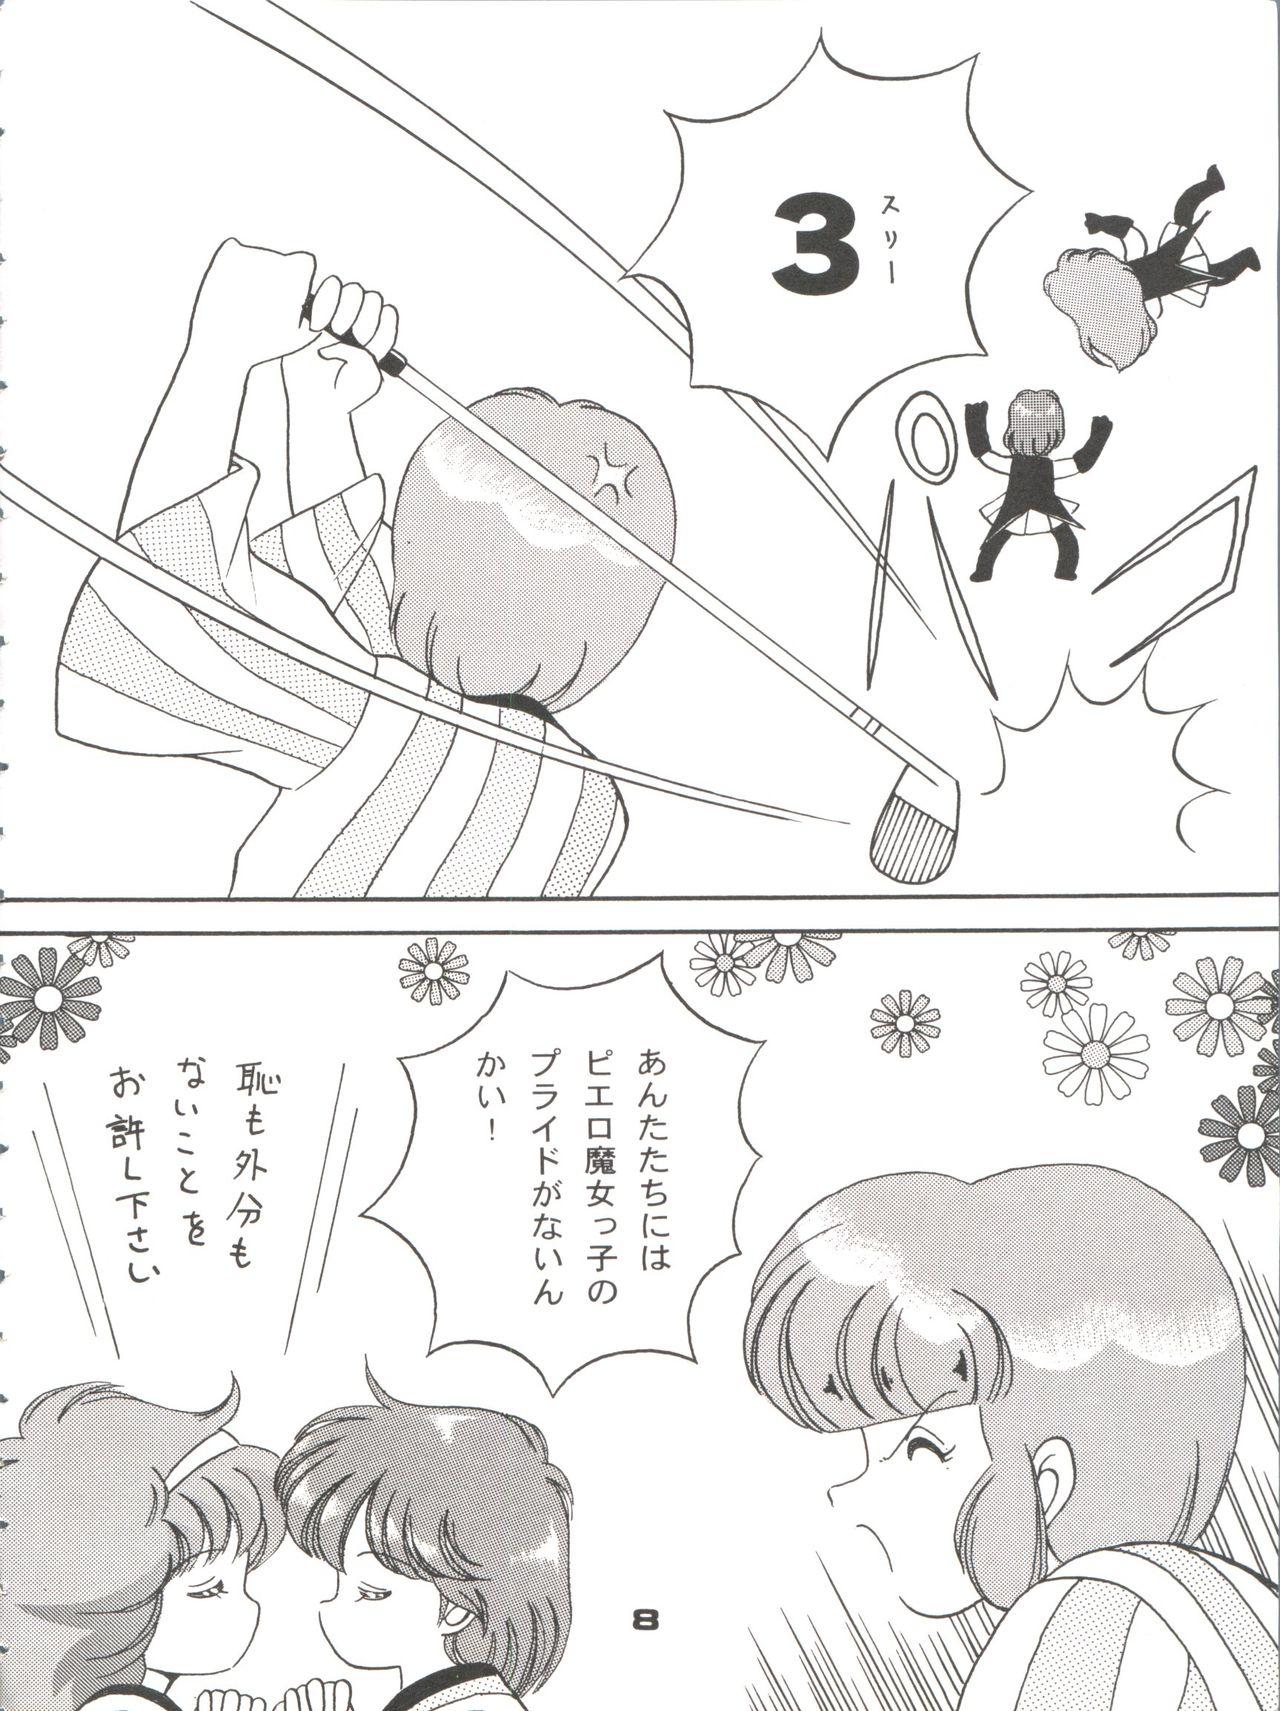 Movies Magical Ponponpon Returns - Magical emi Asians - Page 7